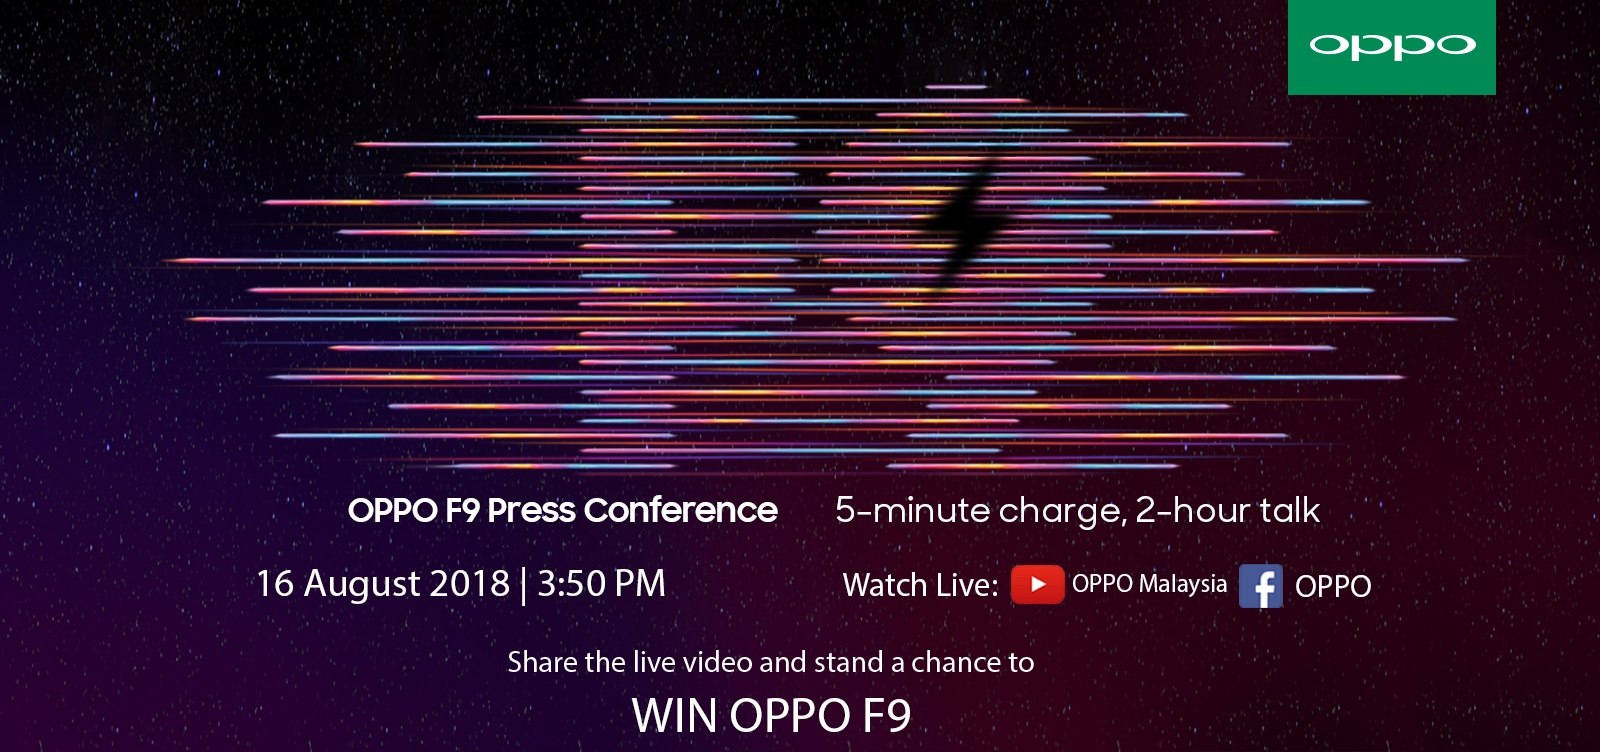 Watch the OPPO Press Conference live stream and stand a chance to bring home a brand new OPPO F9